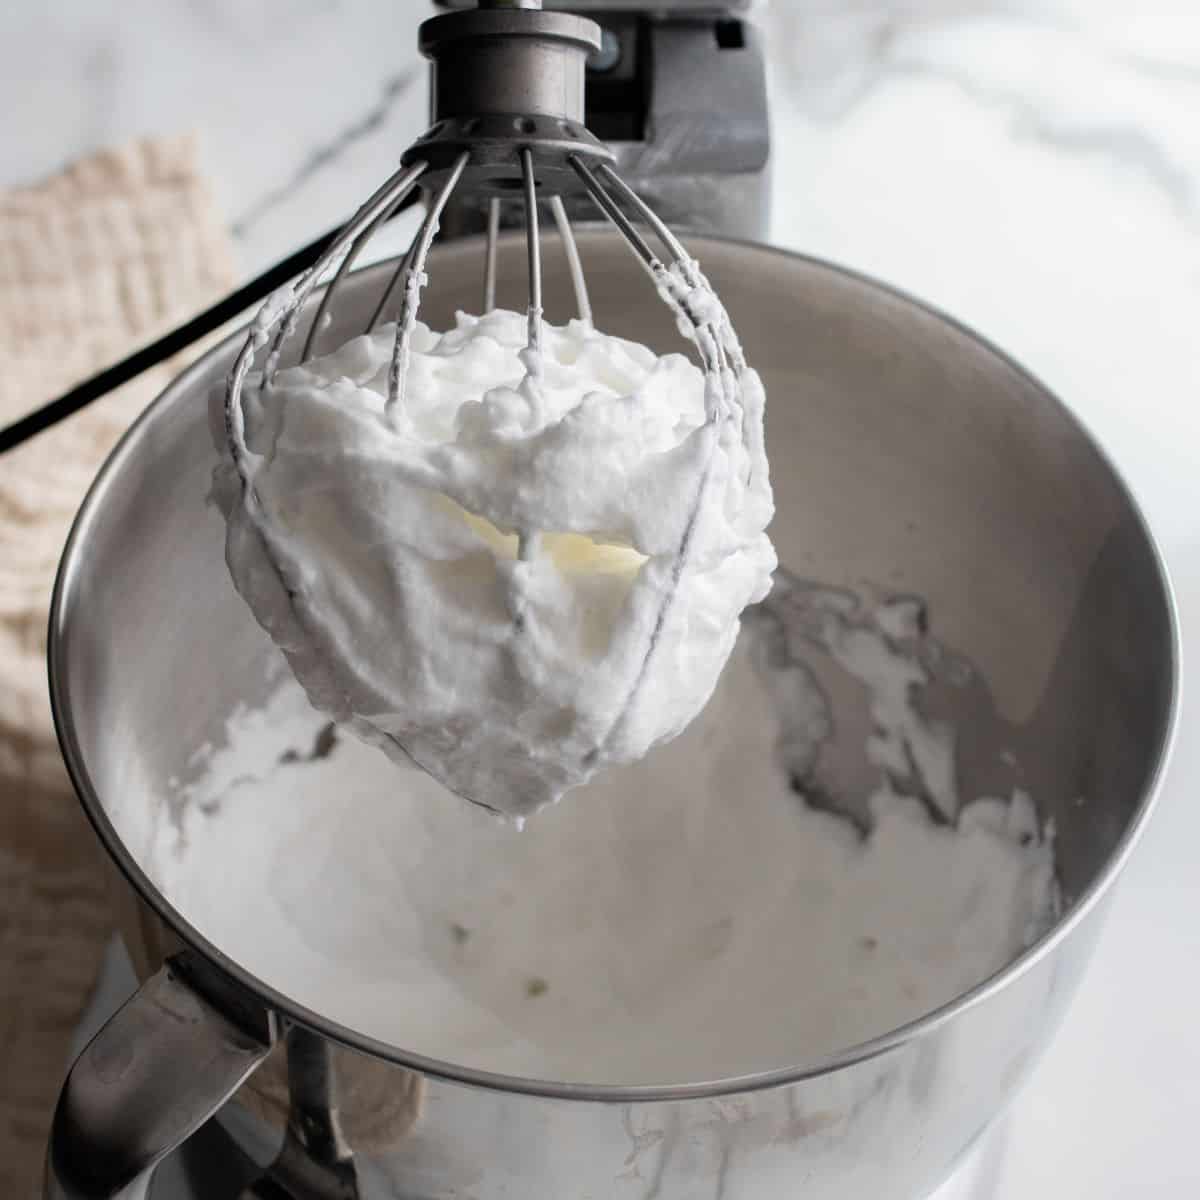 Egg whites on a wire whip showing properly forming peaks in a kitchen aid mixer.